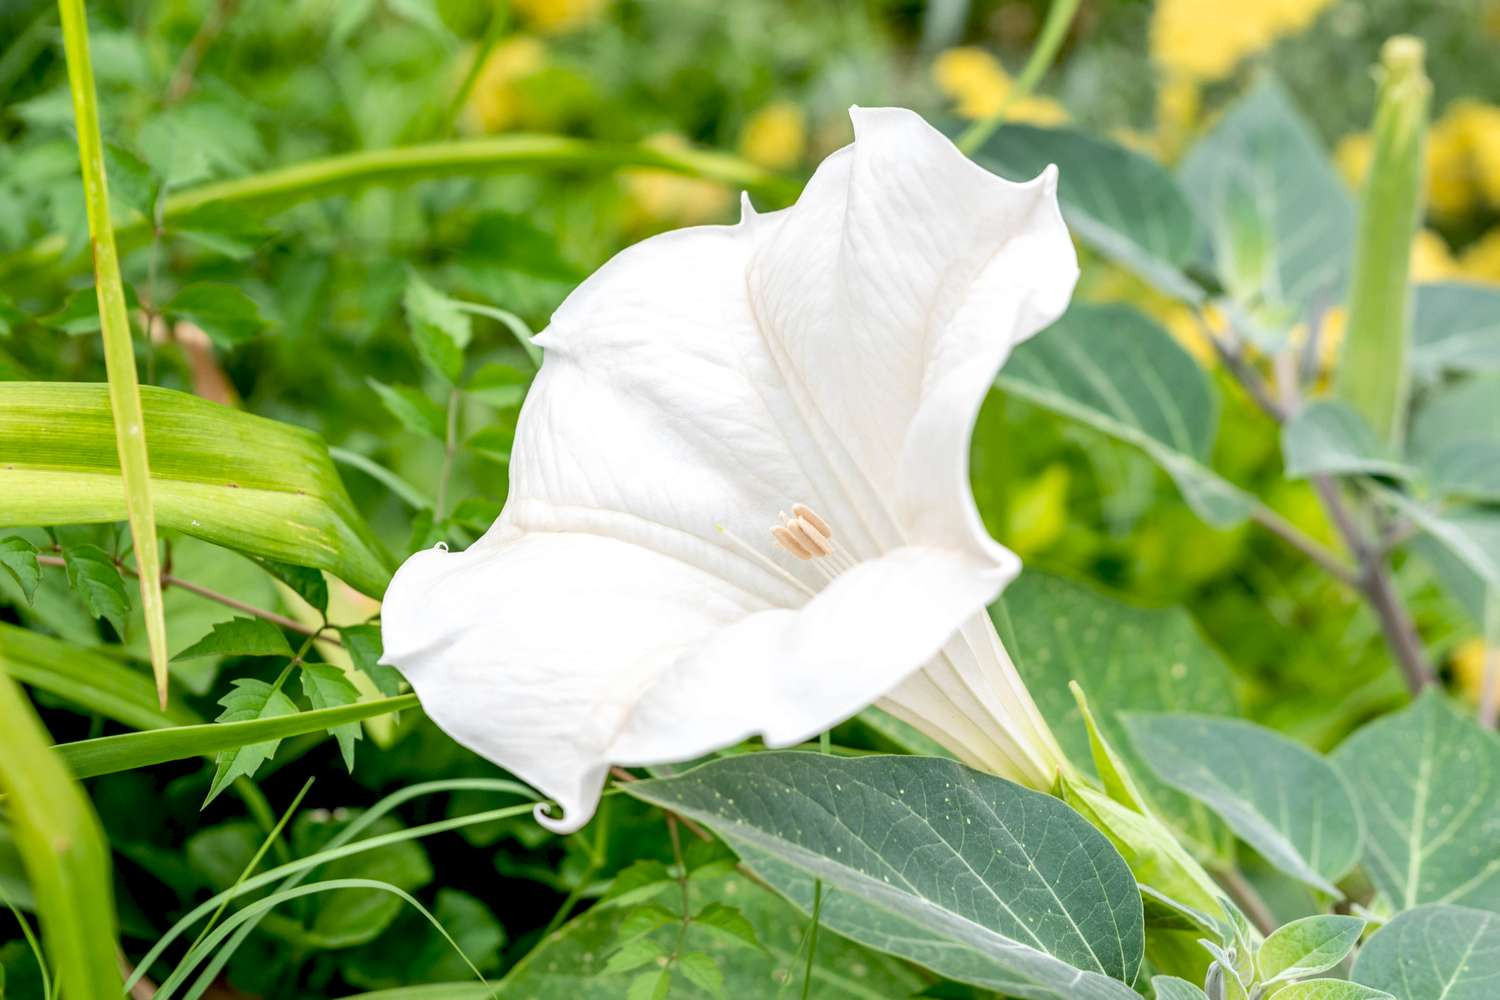 How To Grow And Care For Moonflower